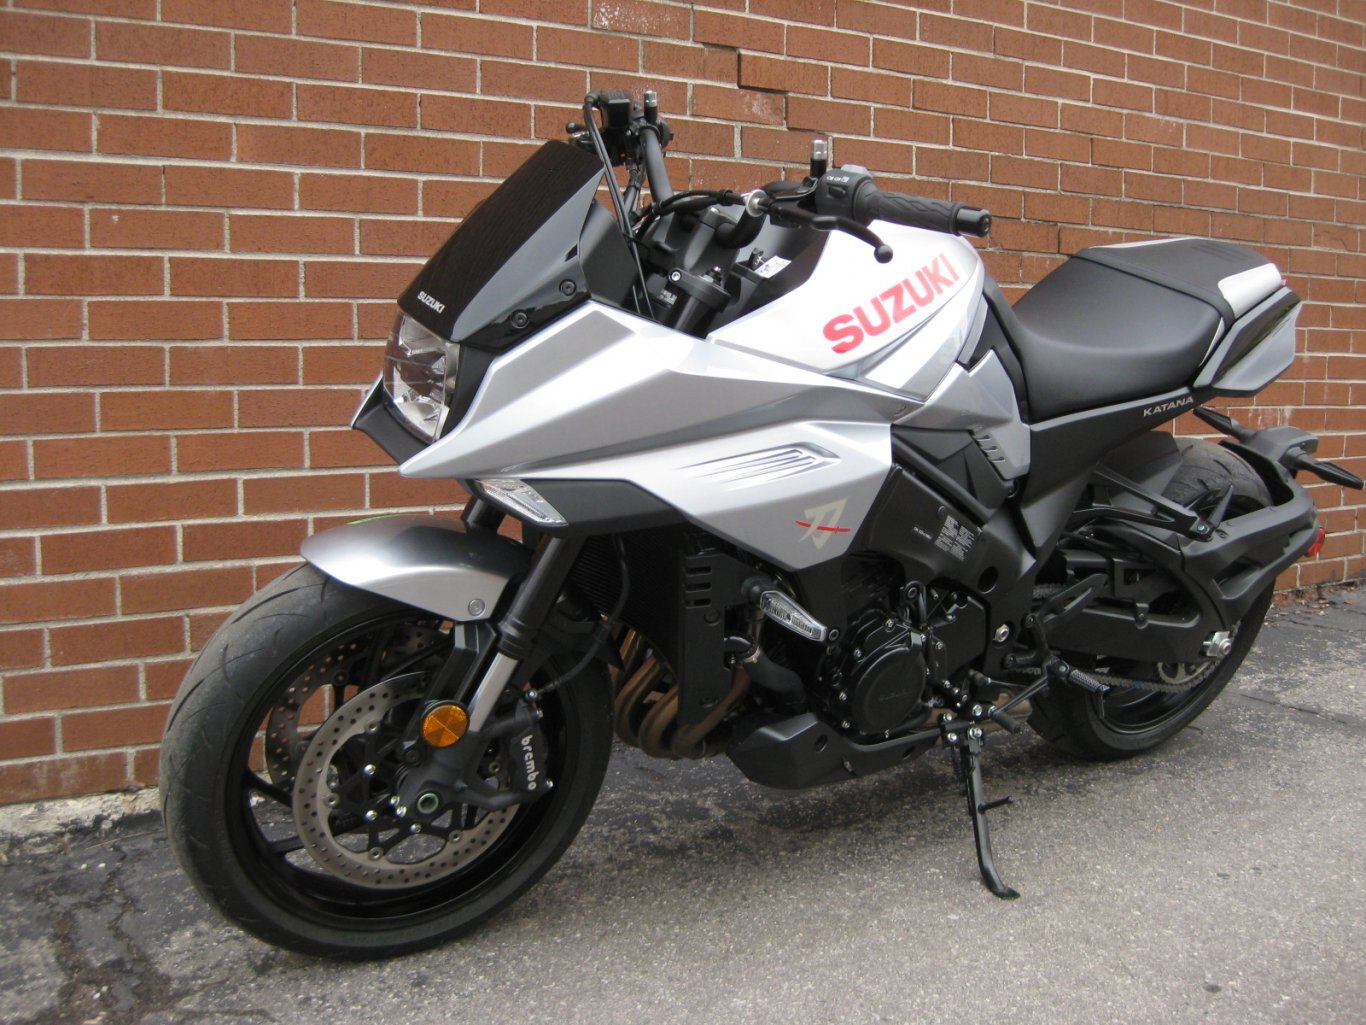 2020 Suzuki GSXS1000SMO ABS Katana SOLD CONGRATULATIONS TO THE “ROAD WARRIOR SIR DAVID!! WHETHER CUTIN THROUGH CITY GRID OR CARVIN THROUGH THE CANYONS YOU WILL HAVE SMILES FOR MANY MILES WITH THANKS FROM GARY & TEAM CYCLE WORLD!!!!